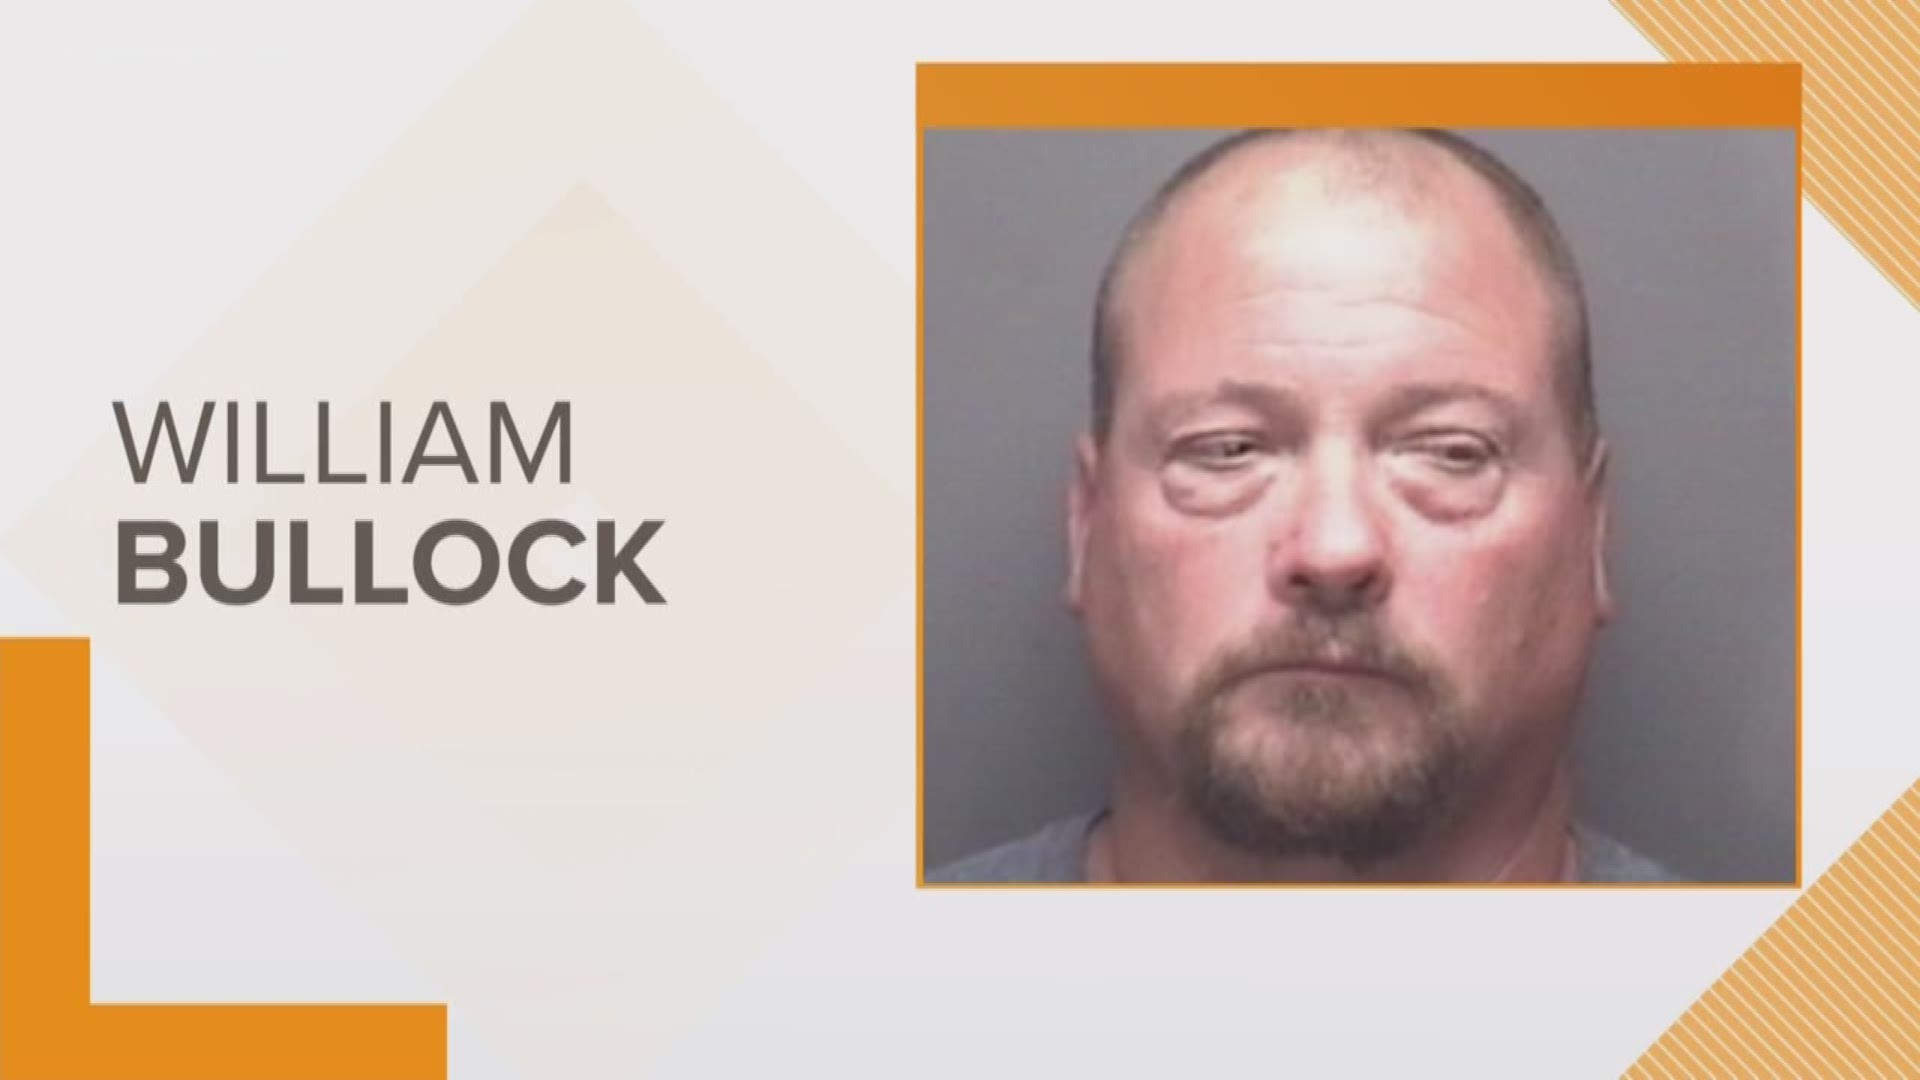 William Earl Bullock is charged with reckless involuntary manslaughter, and operating a vehicle while texting. The motorcyclist died several months after the crash.